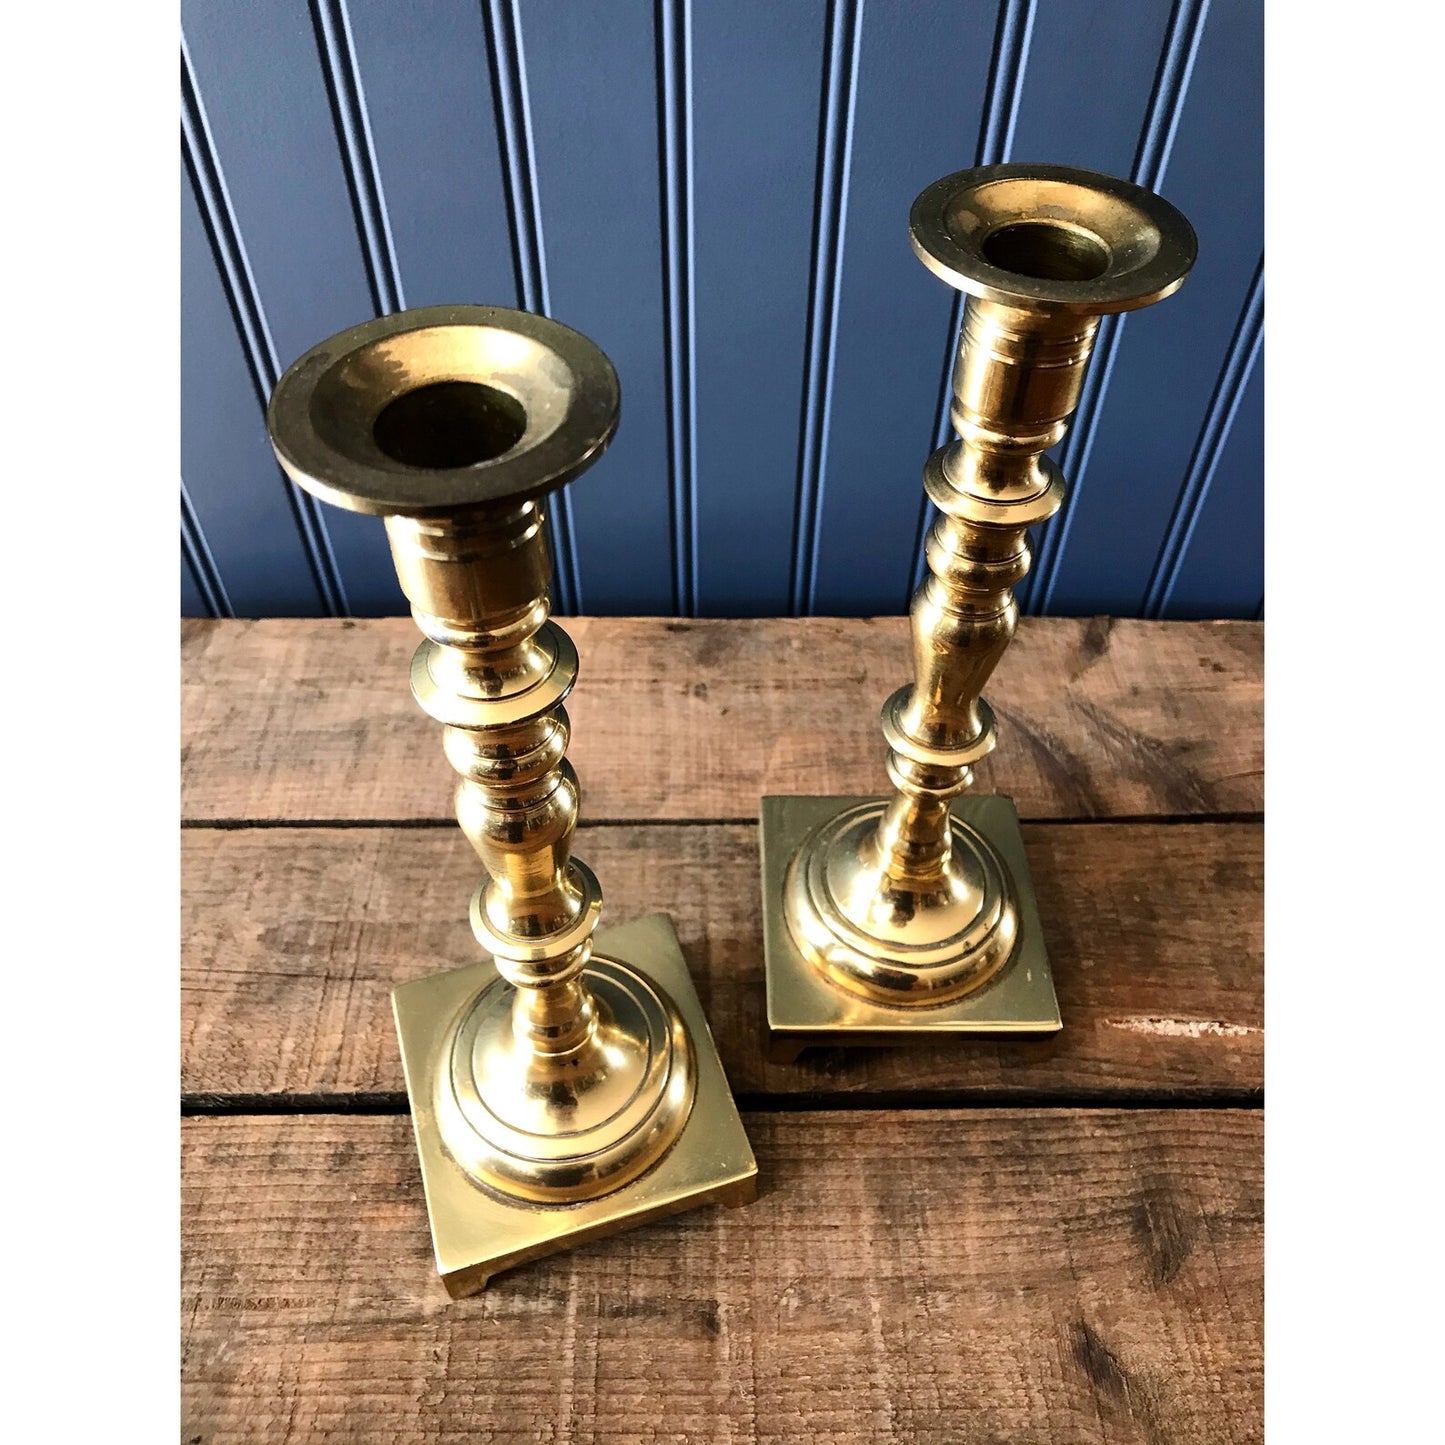 Pair of Tall Brass Taper Candle Holders